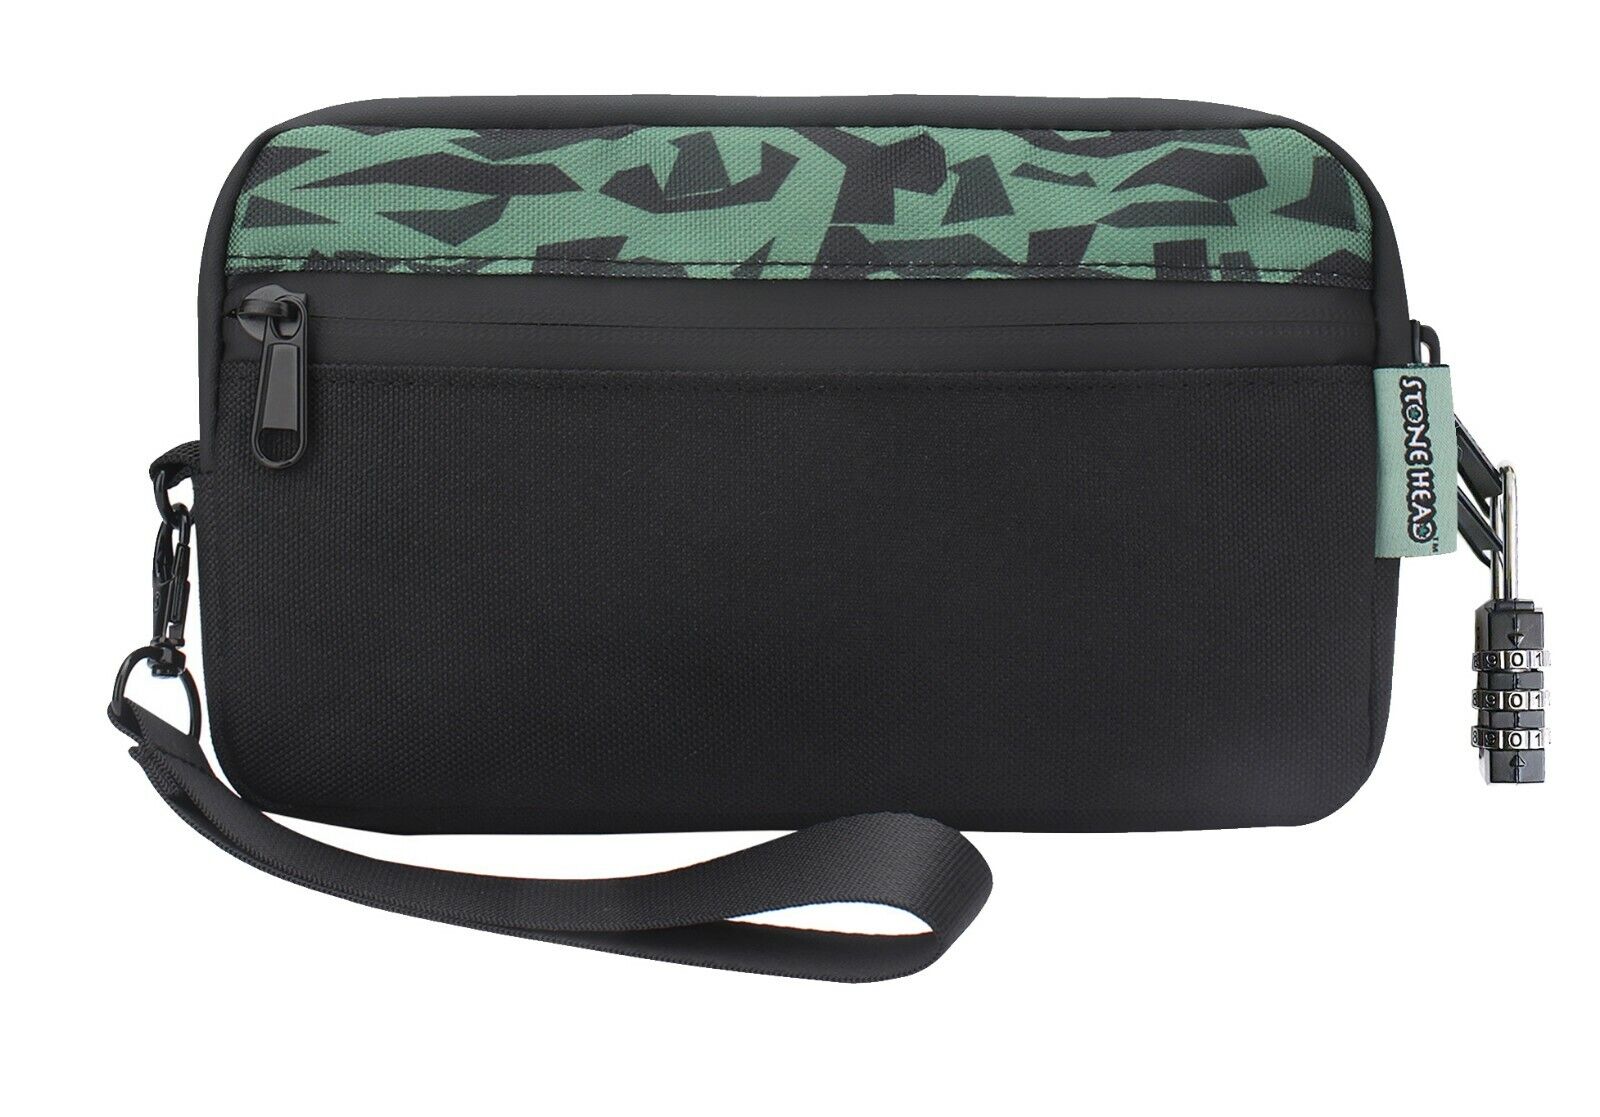 OFFICIAL STONEHEAD® Black & Green Camo Smell Proof Bag with Combination Lock 